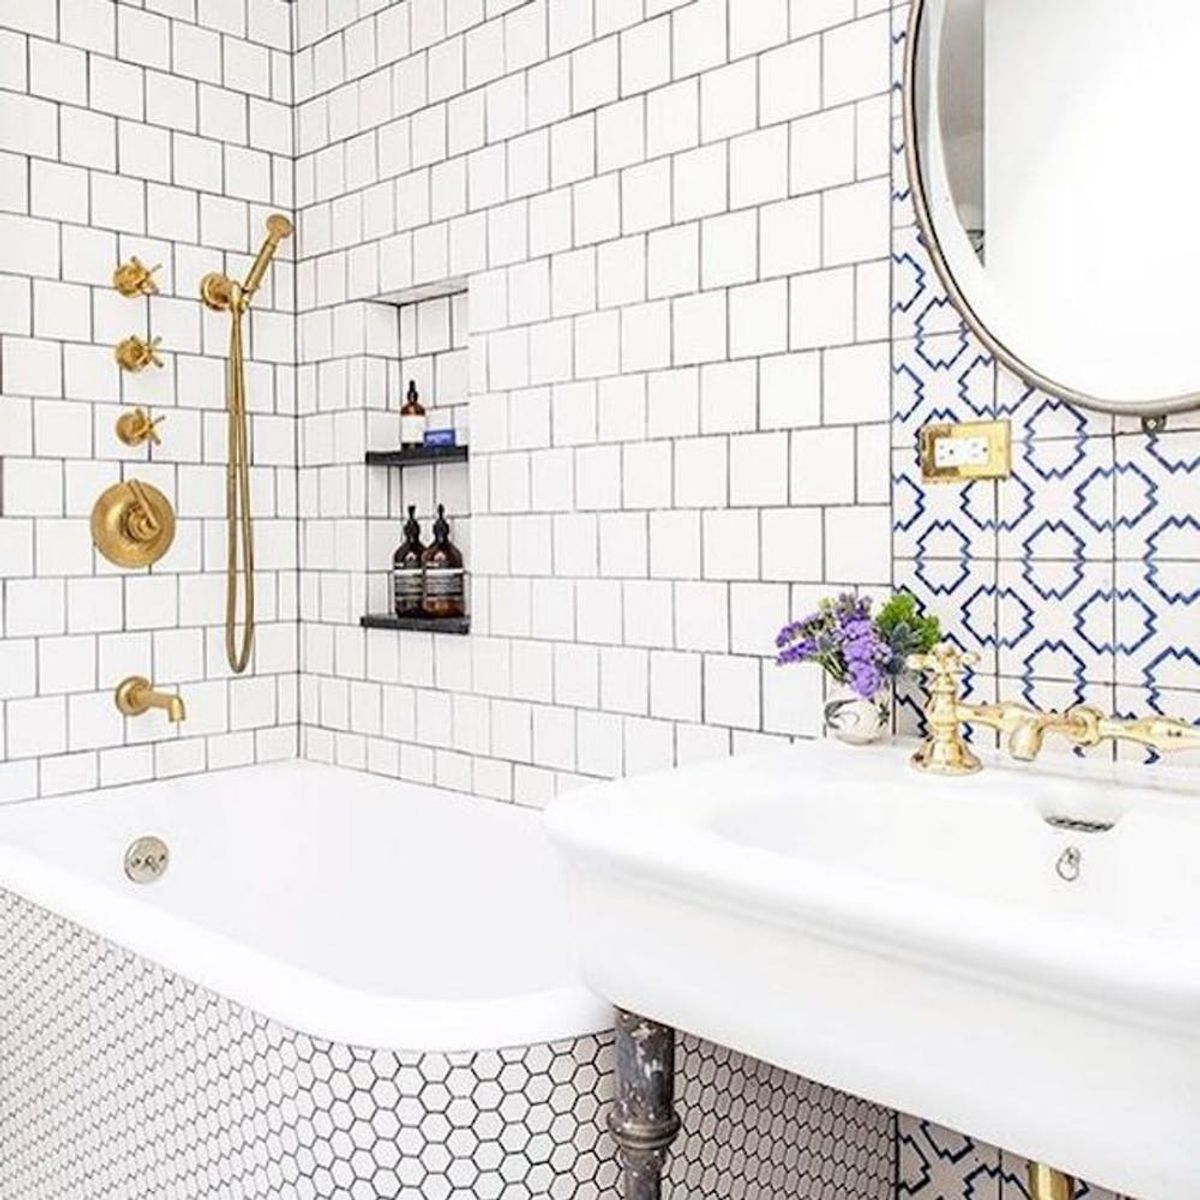 Freshen Up Your Bathroom in 2017 With This Mixed Tile Trend